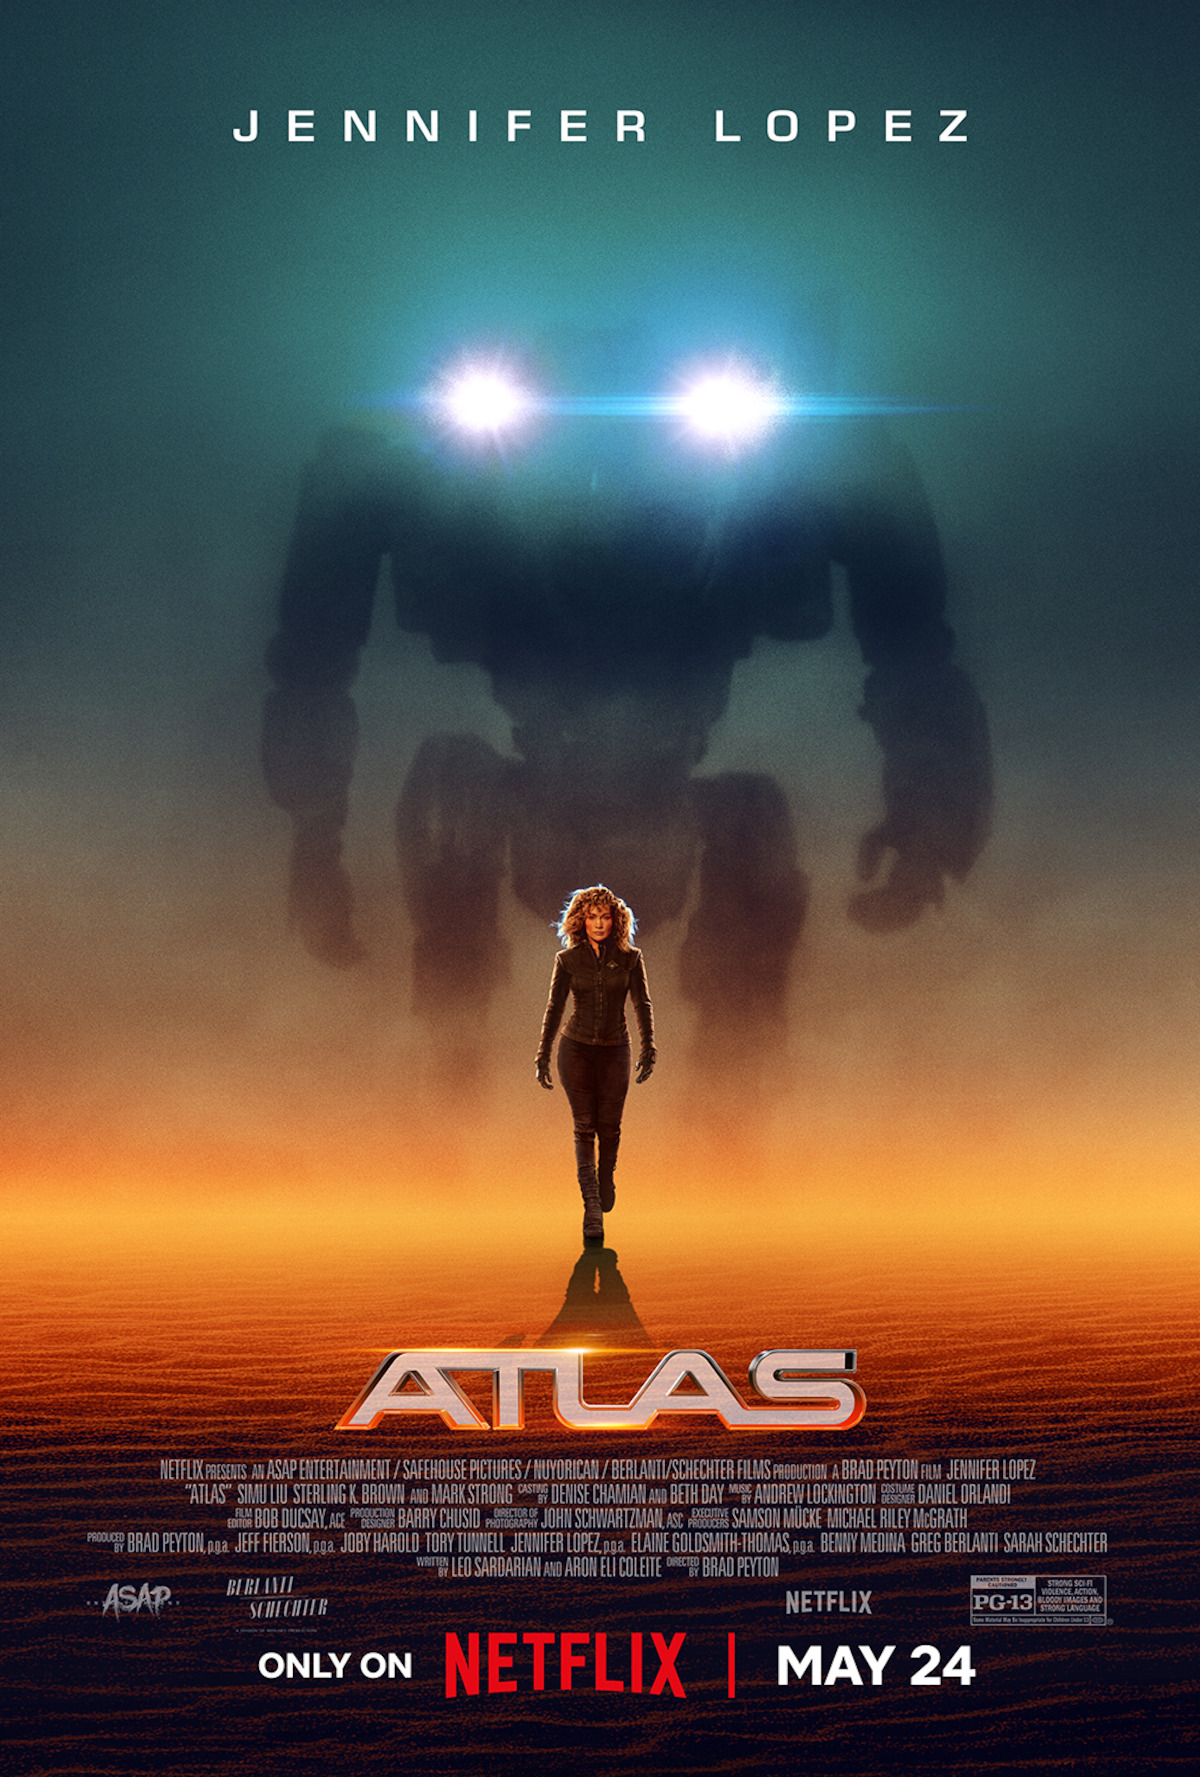 A woman in a black tank top looks fearfulness as she confidently strides forwards. Behind her is a giant mech robot.